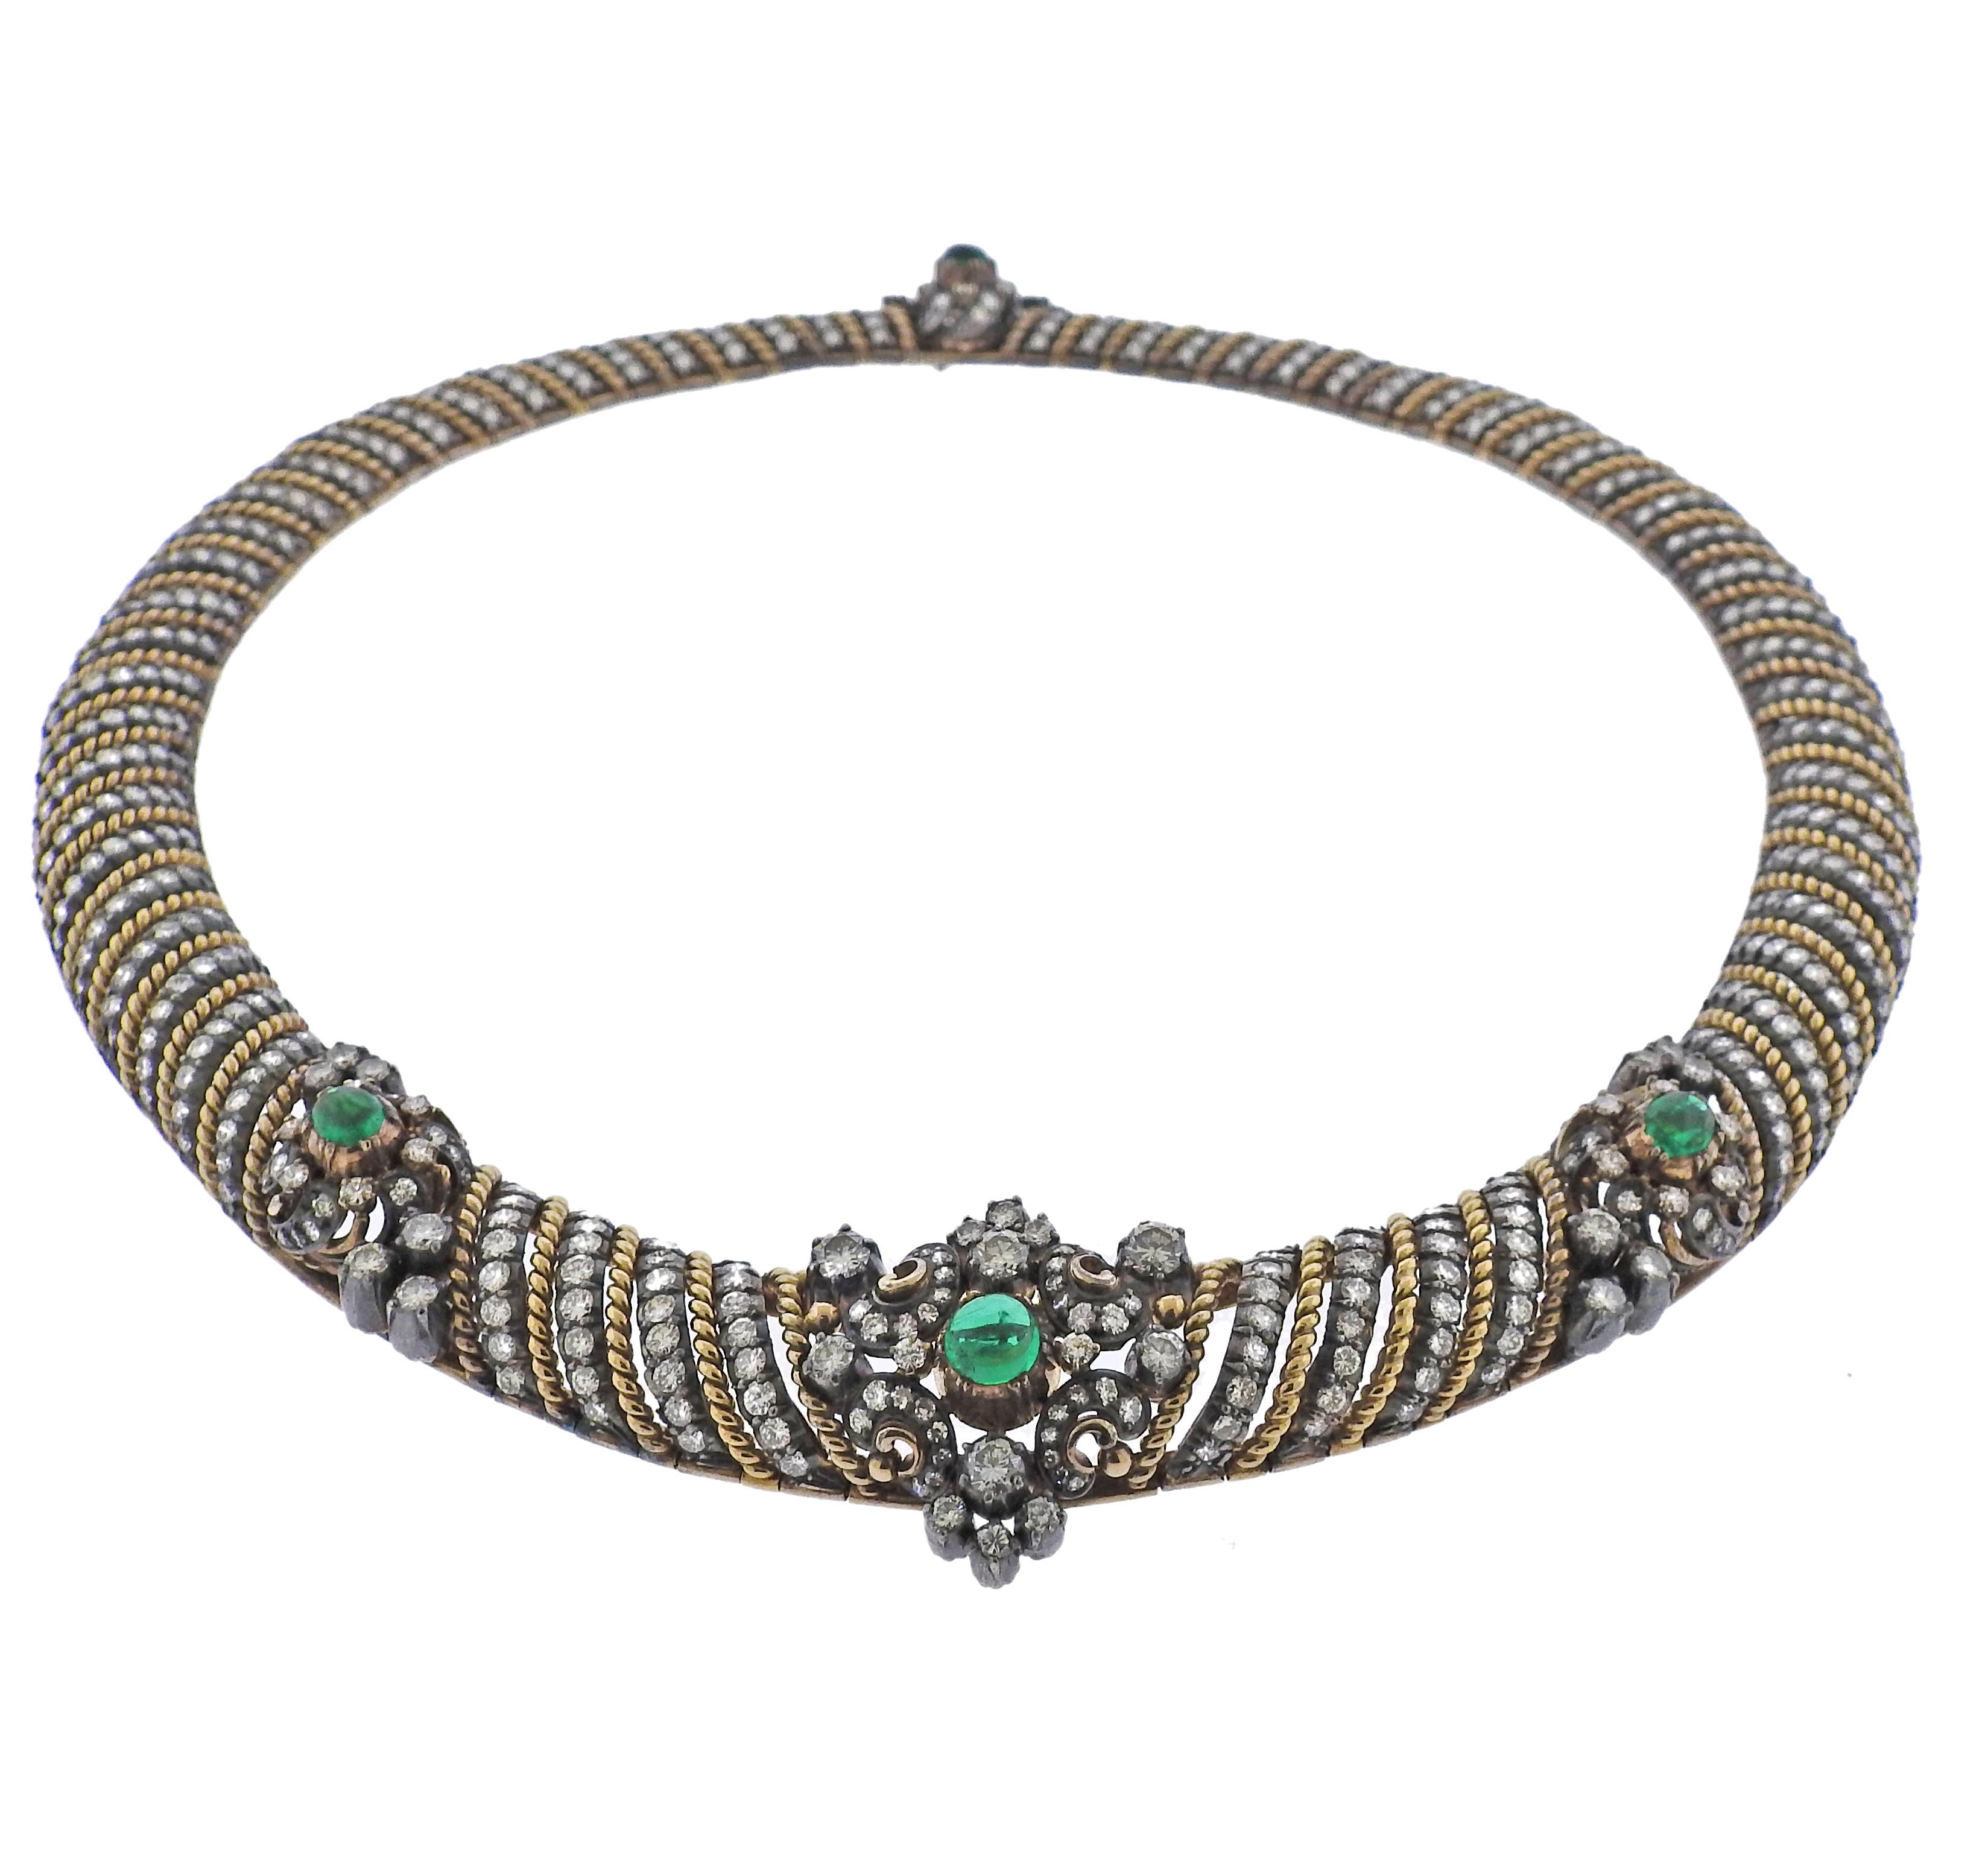 Metal: 18k Gold & Silver
Gemstones - Emerald Cabochons.  Diamonds approx. 18.00ctw VS / G-H
Necklace Is 16